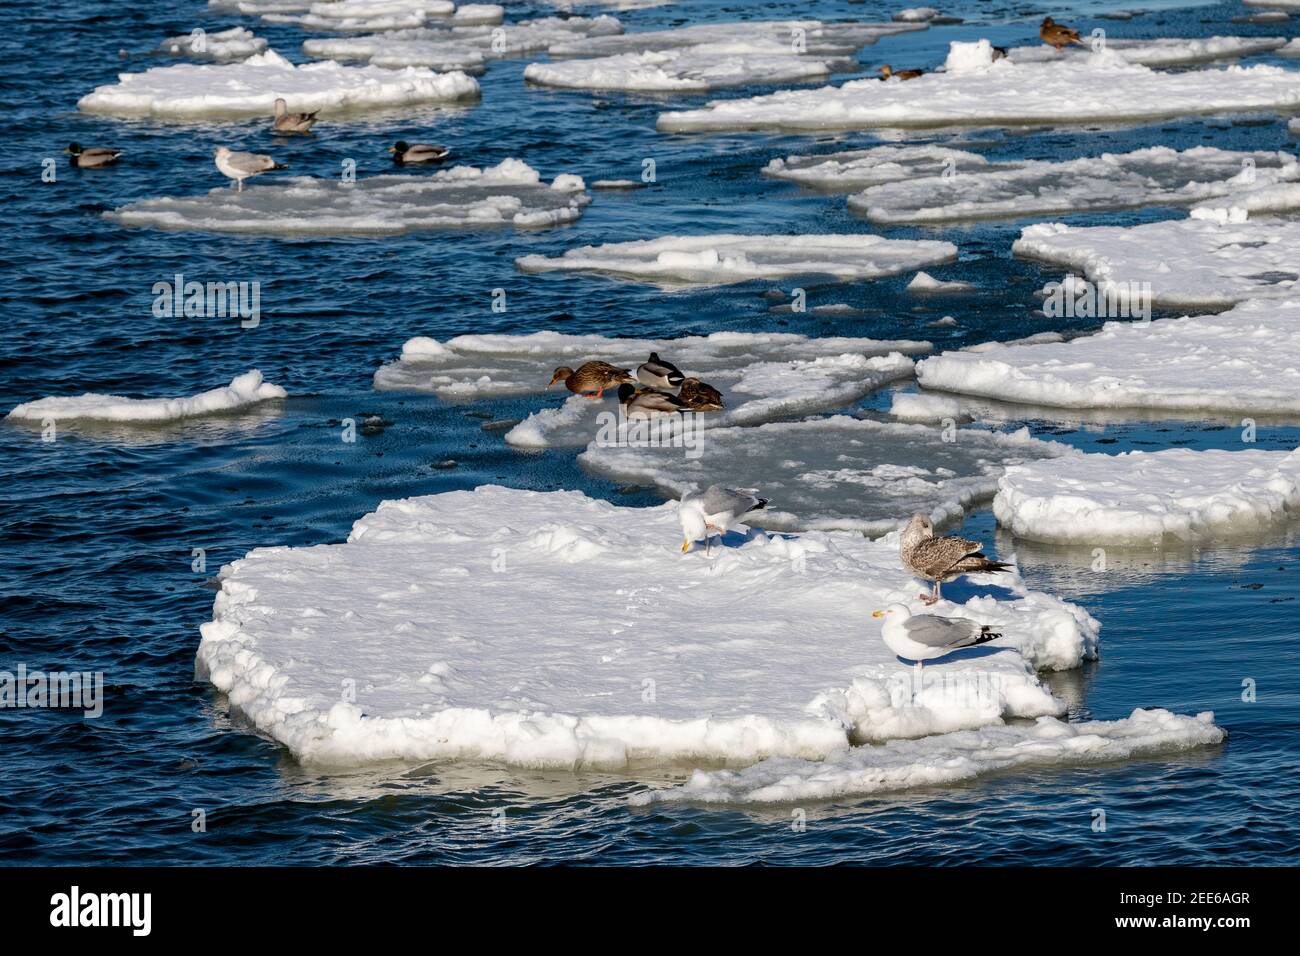 Wild birds perched on a piece of ice floating on the surface of the water Coastal sea birds. Winter season. Stock Photo